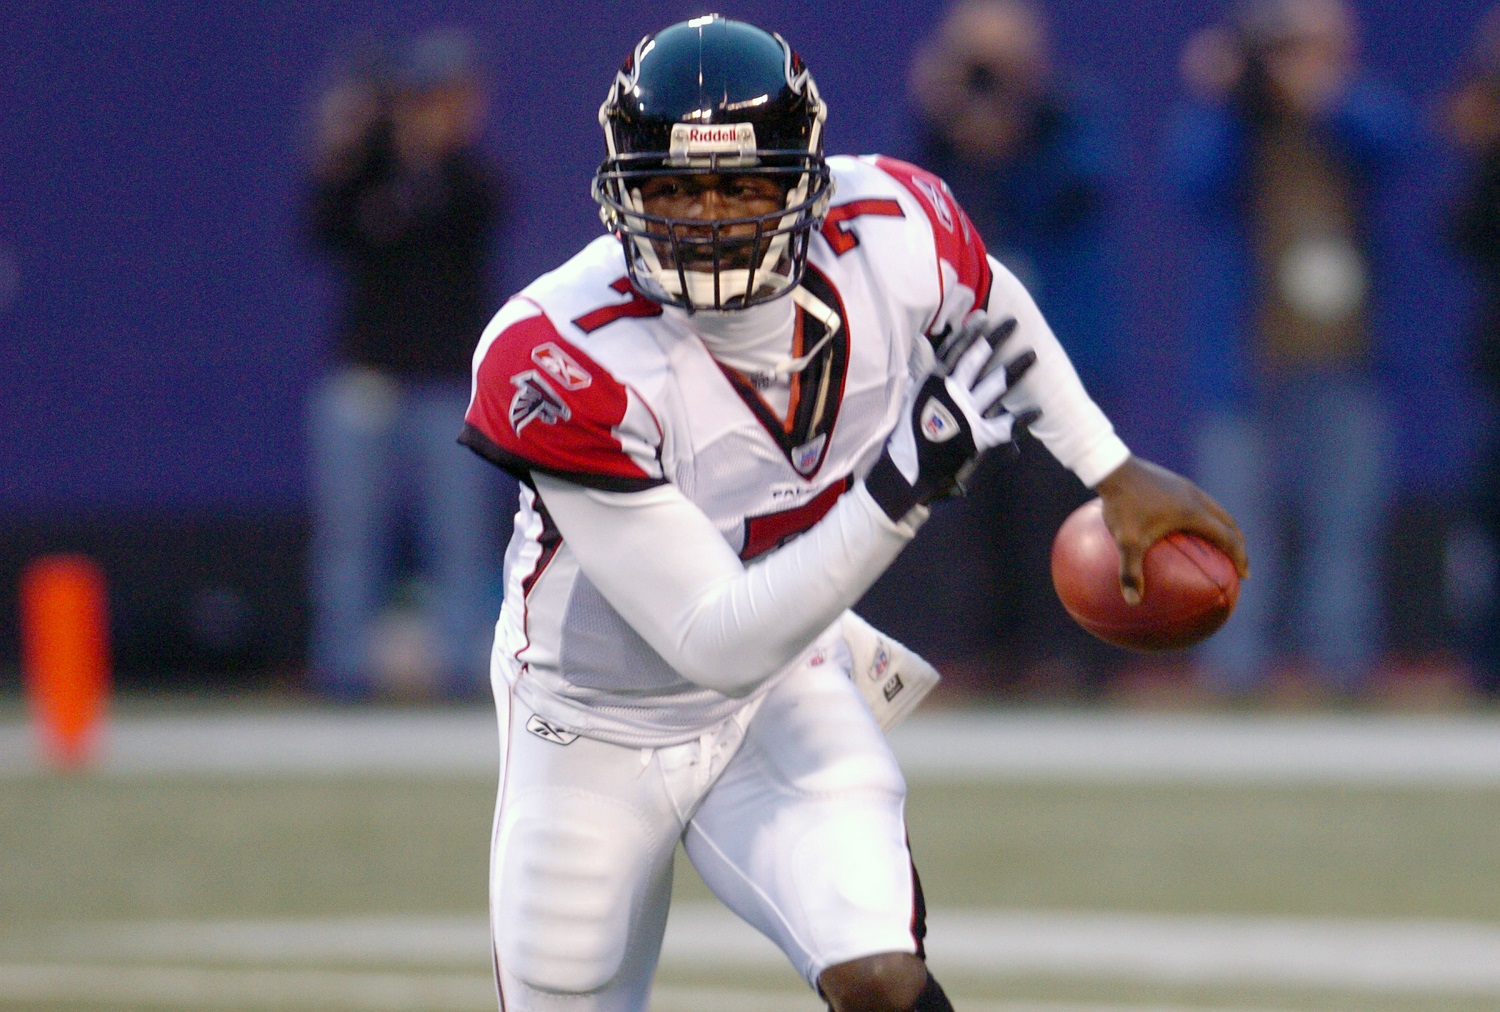 Michael Vick of the Atlanta Falcons runs with the ball against the New York Giants during an NFL game on Nov. 21, 2004. at MetLife Stadium in East Rutherford, New Jersey.